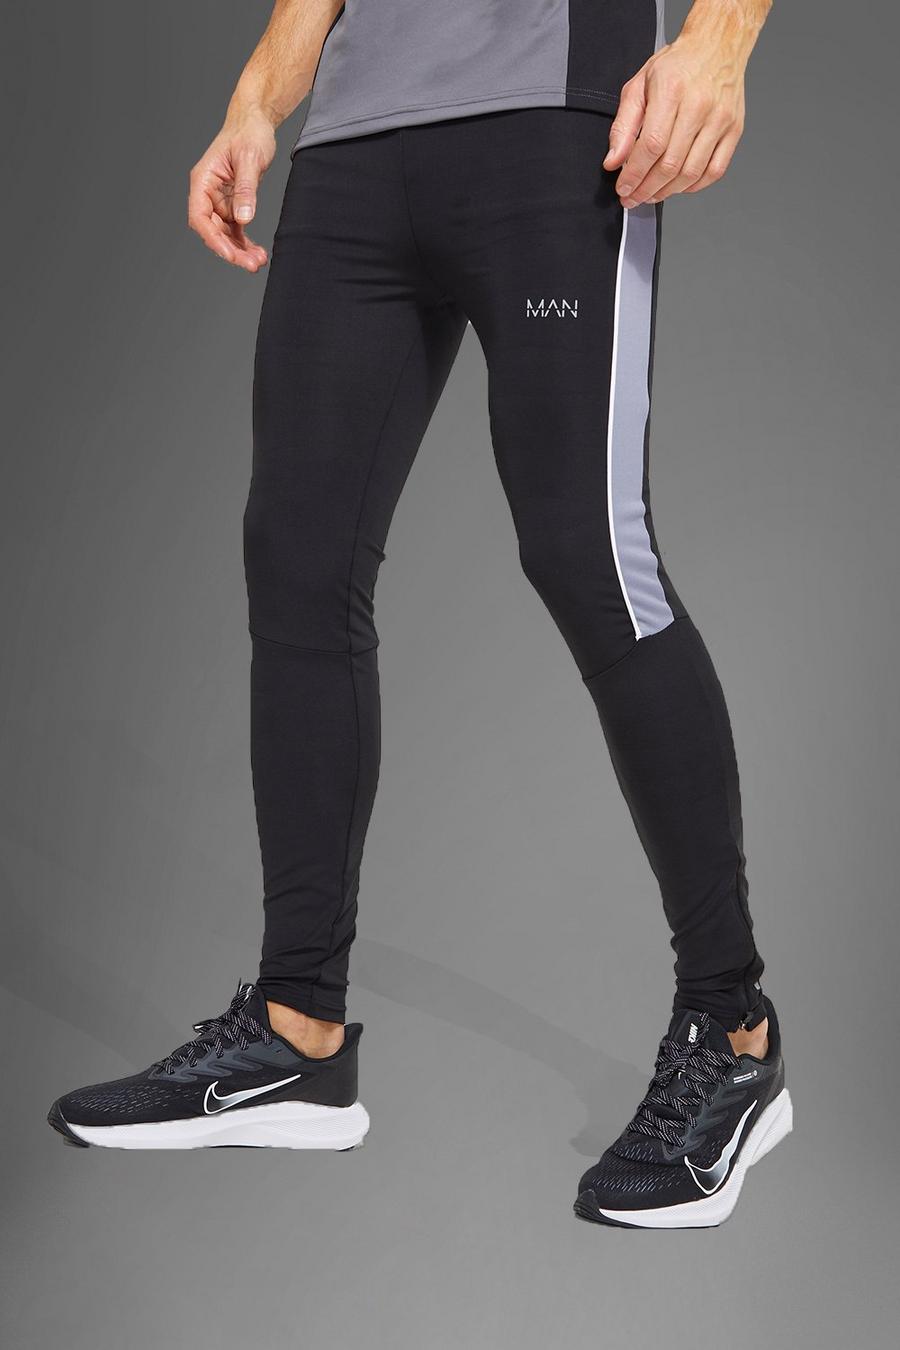 Black Tall Man Active Gym Contrast Piping Legging